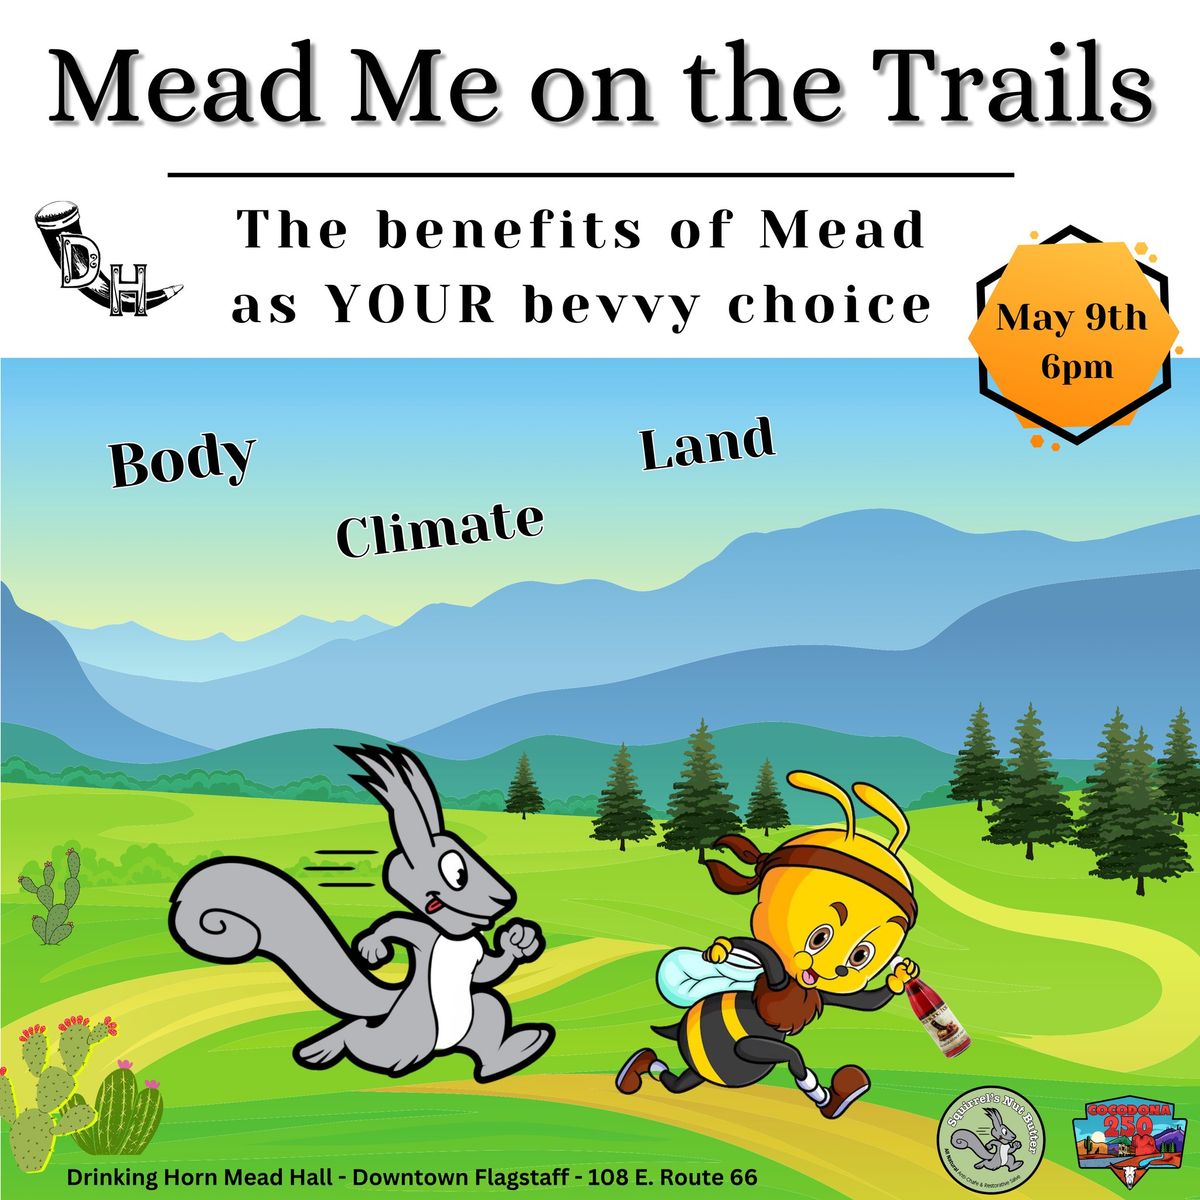 Mead Me On The Trails - A discussion on Mead as the best alcoholic choice for endurance athletes